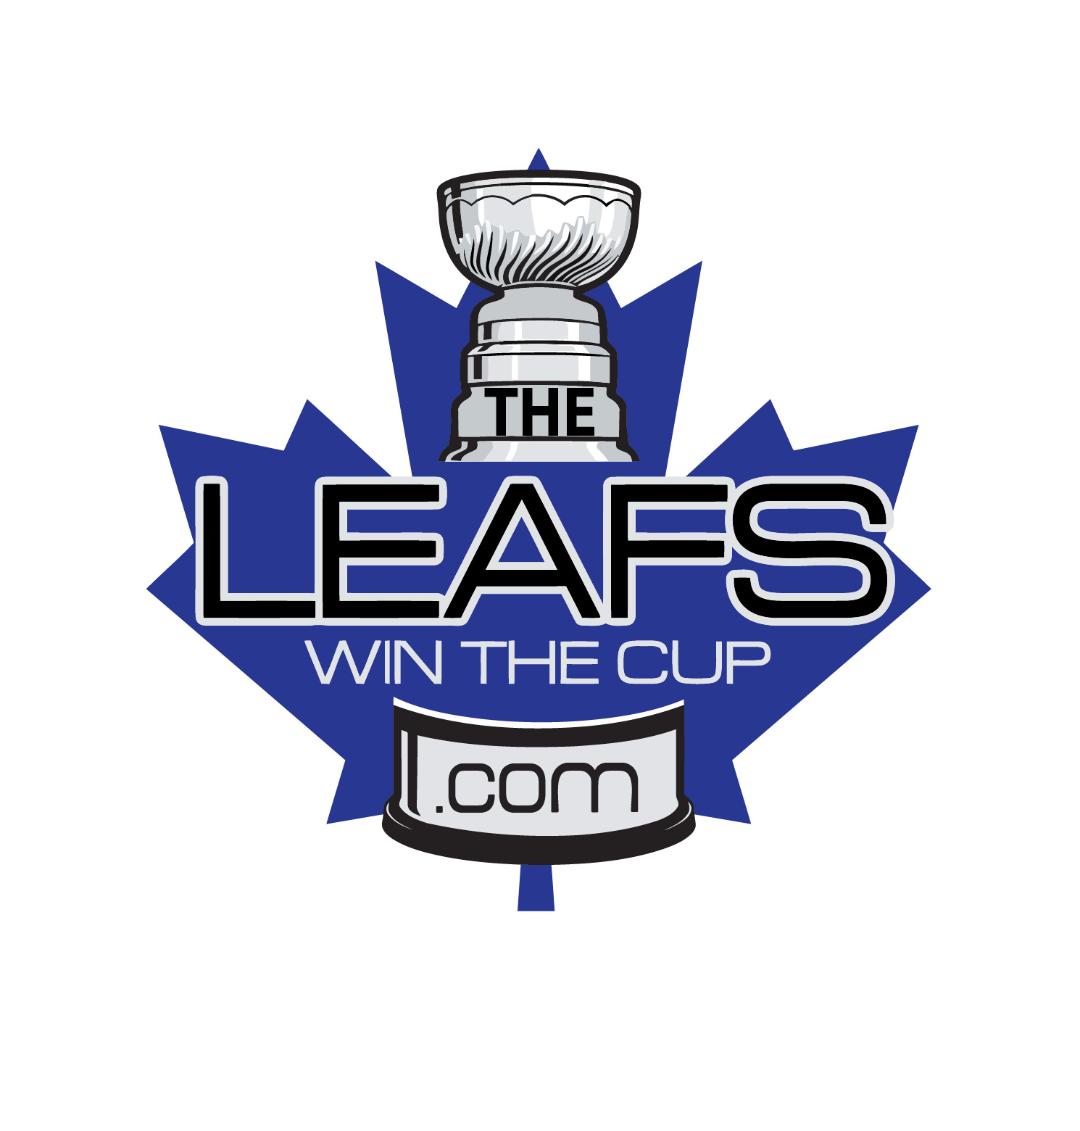 The Leafs Win the Cup!